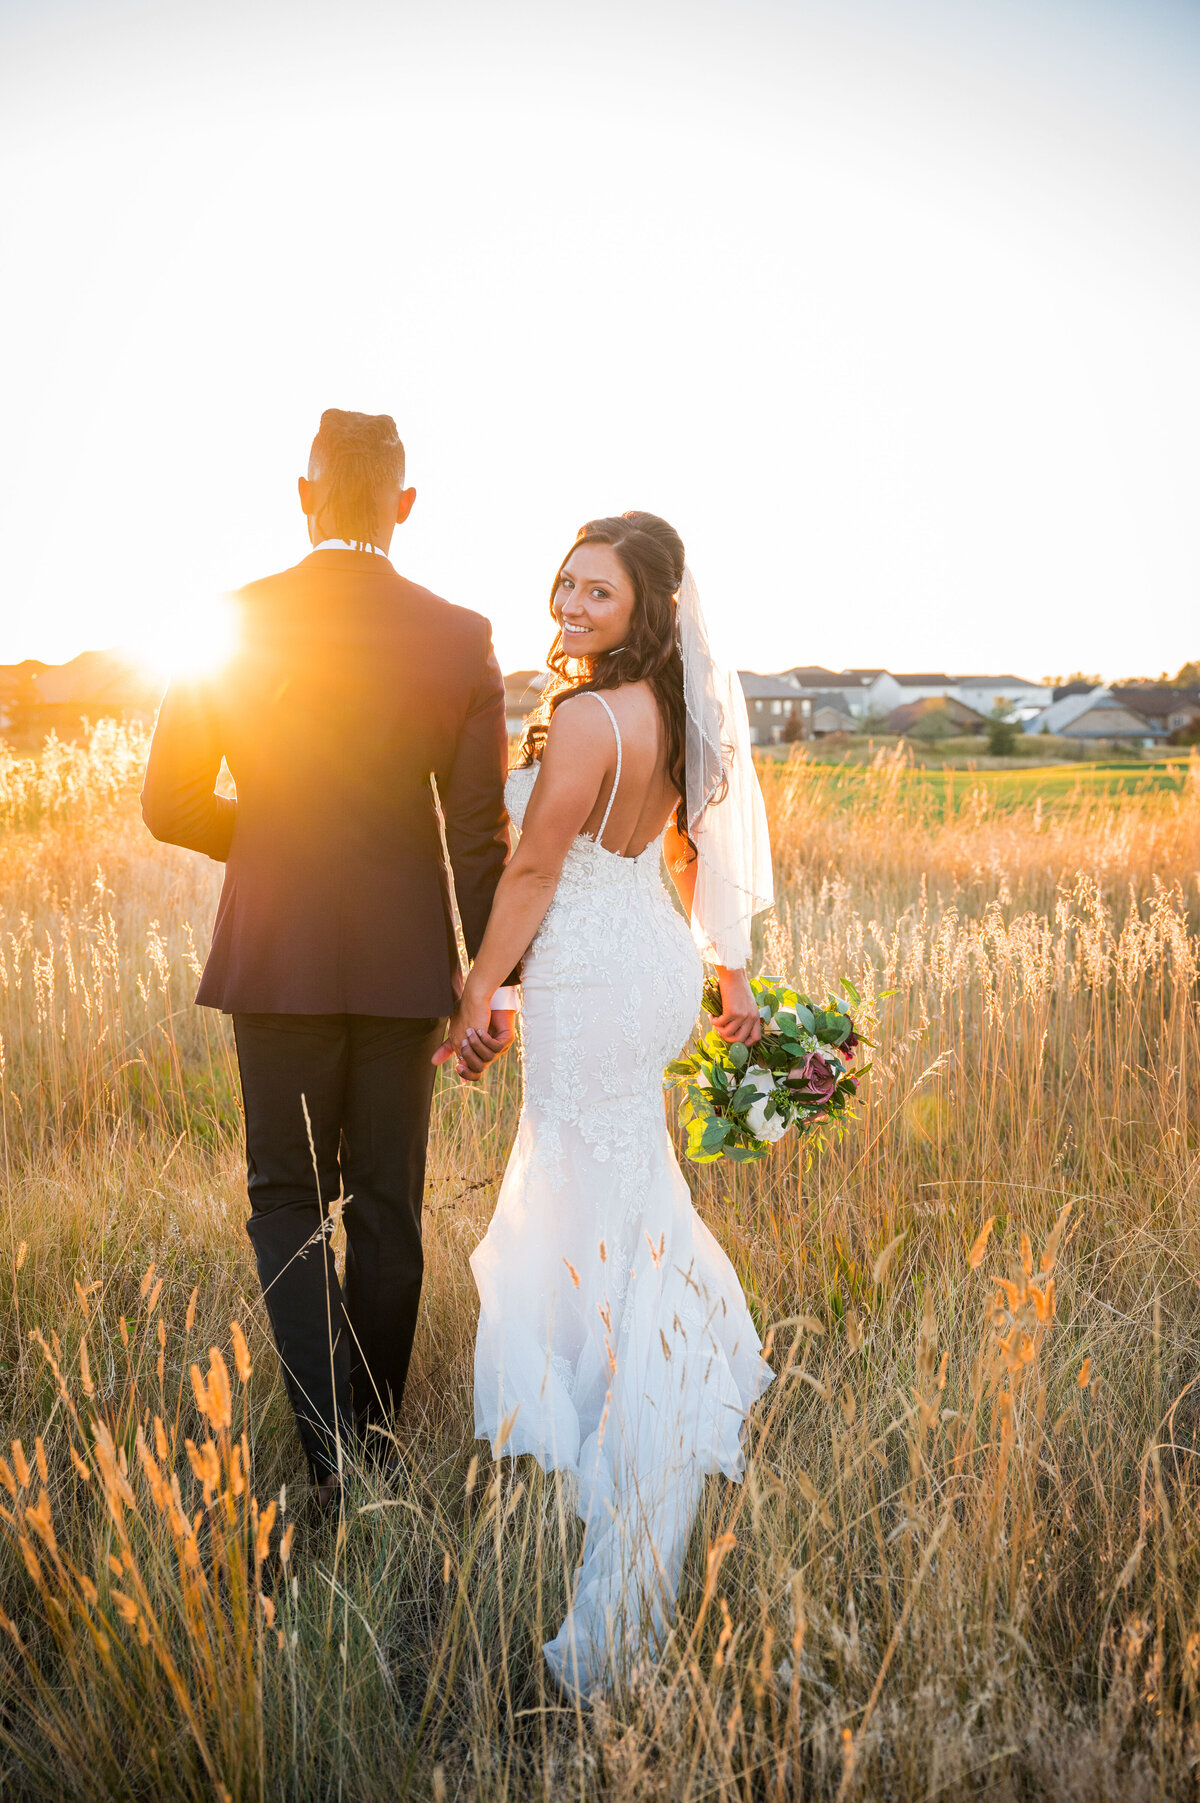 A bride holds hands with her groom and glances over her shoulder at golden hour.